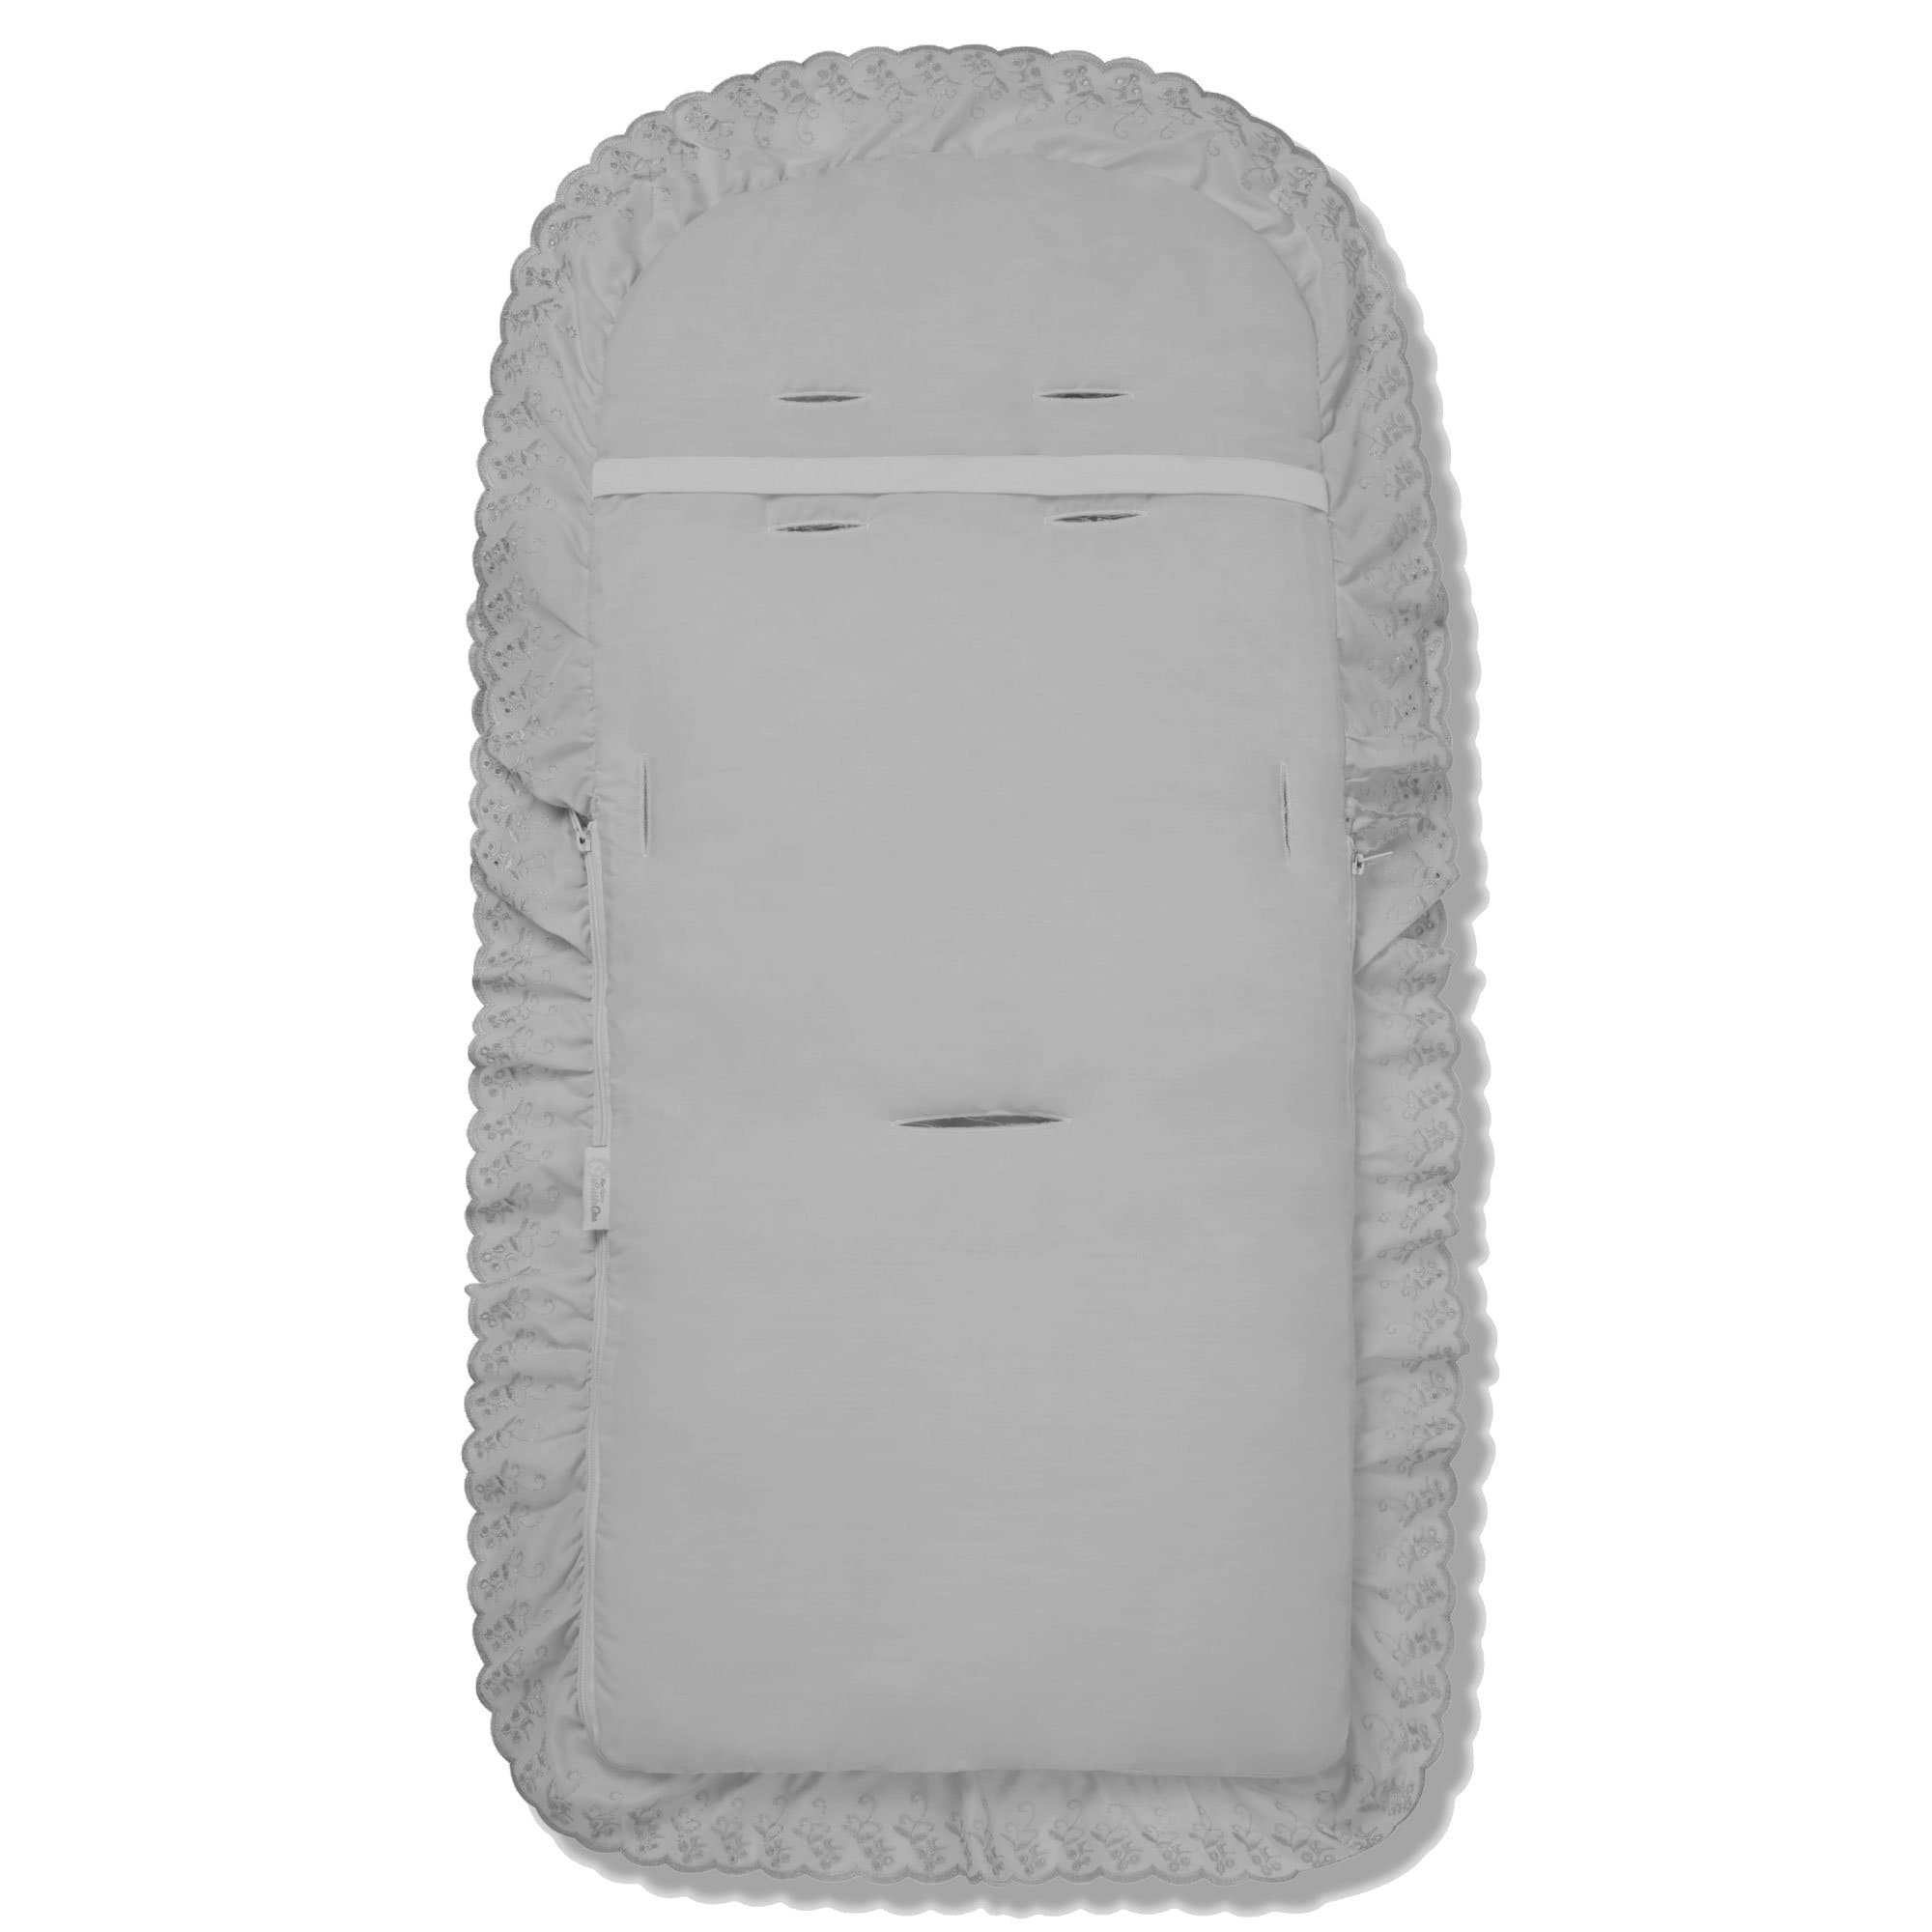 Broderie Anglaise Footmuff / Cosy Toes Compatible with Venicci - For Your Little One